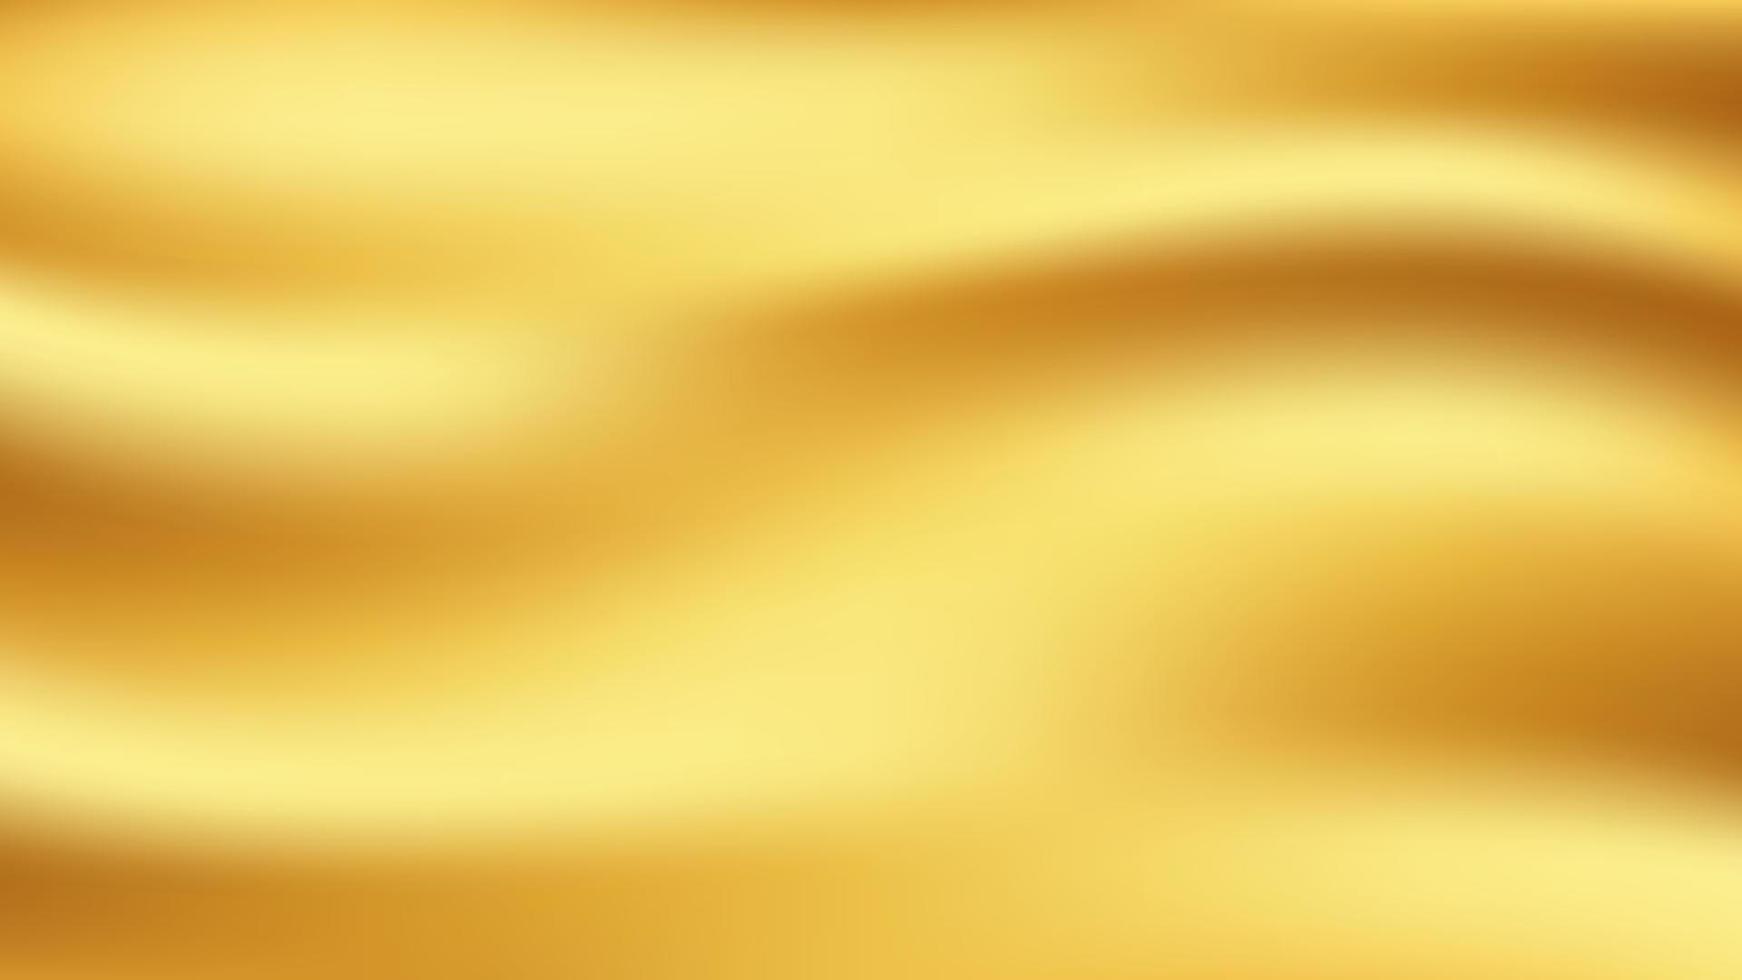 Wave golden abstract background, vector illustration